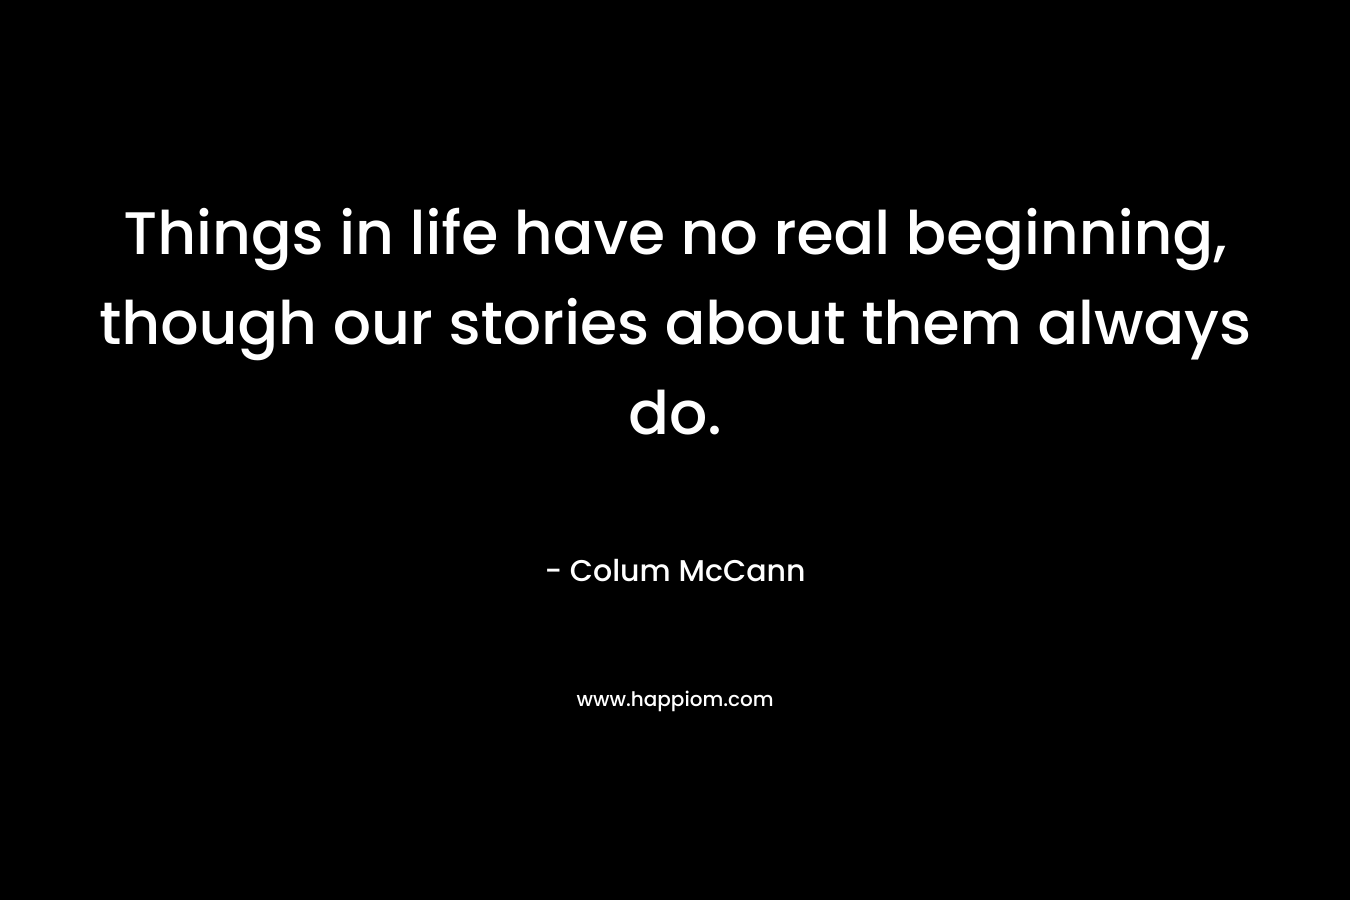 Things in life have no real beginning, though our stories about them always do.